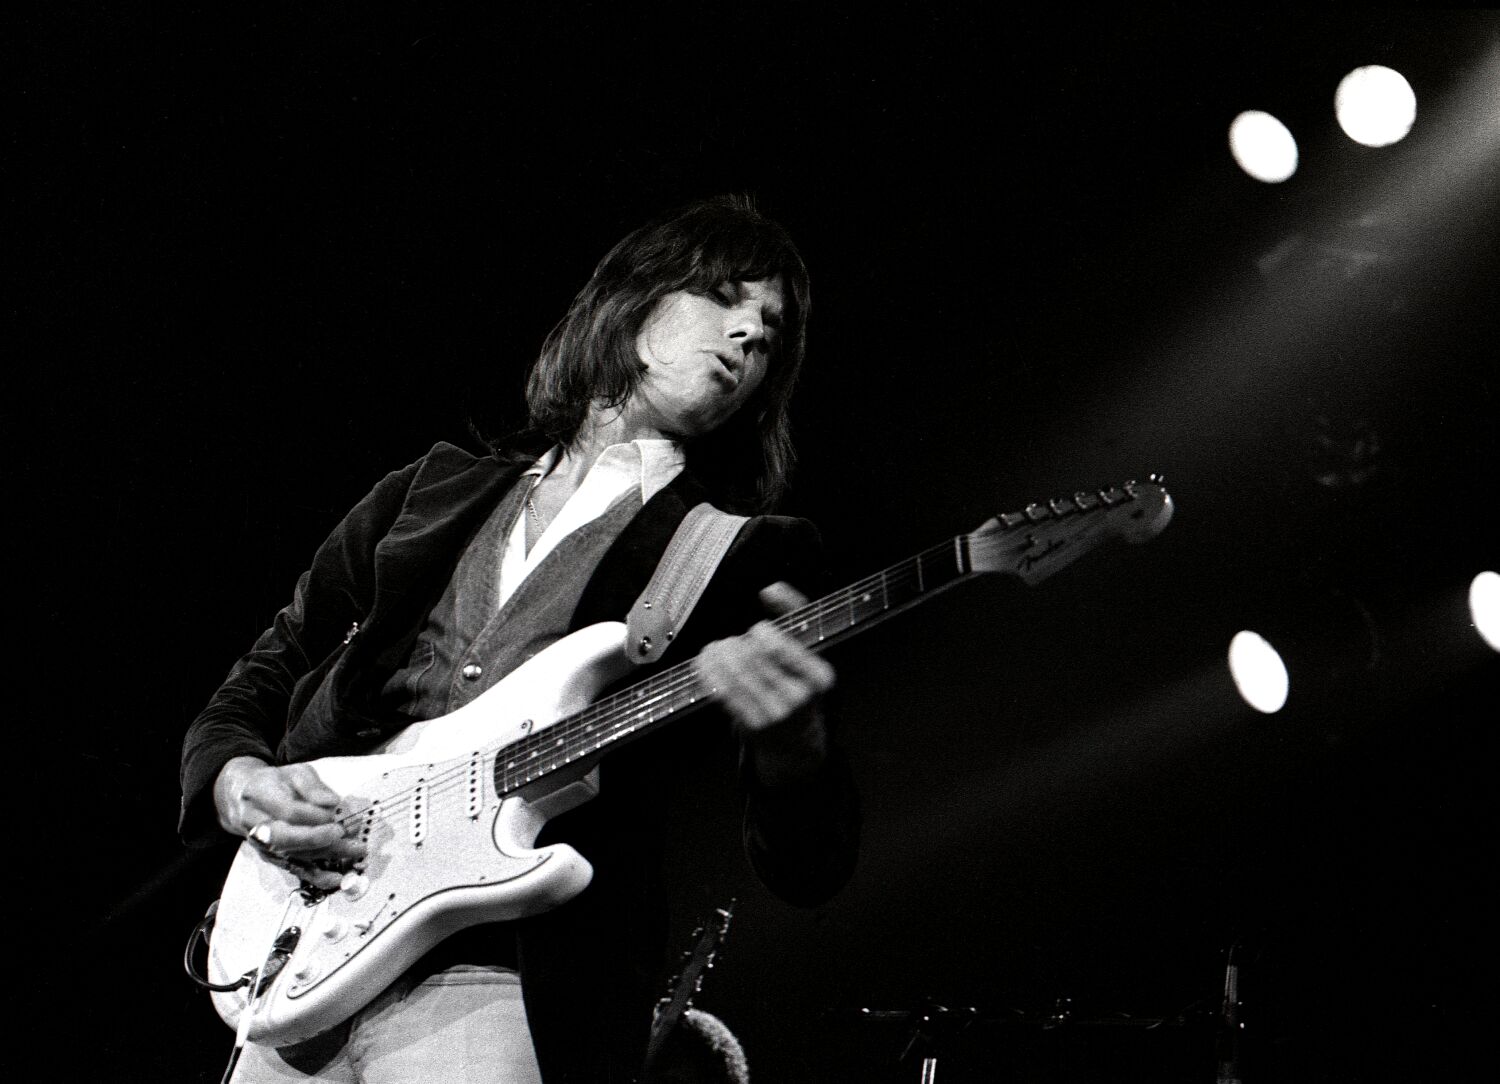 Appreciation: When the electric guitar promised revolution, Jeff Beck fearlessly explored and mastered it